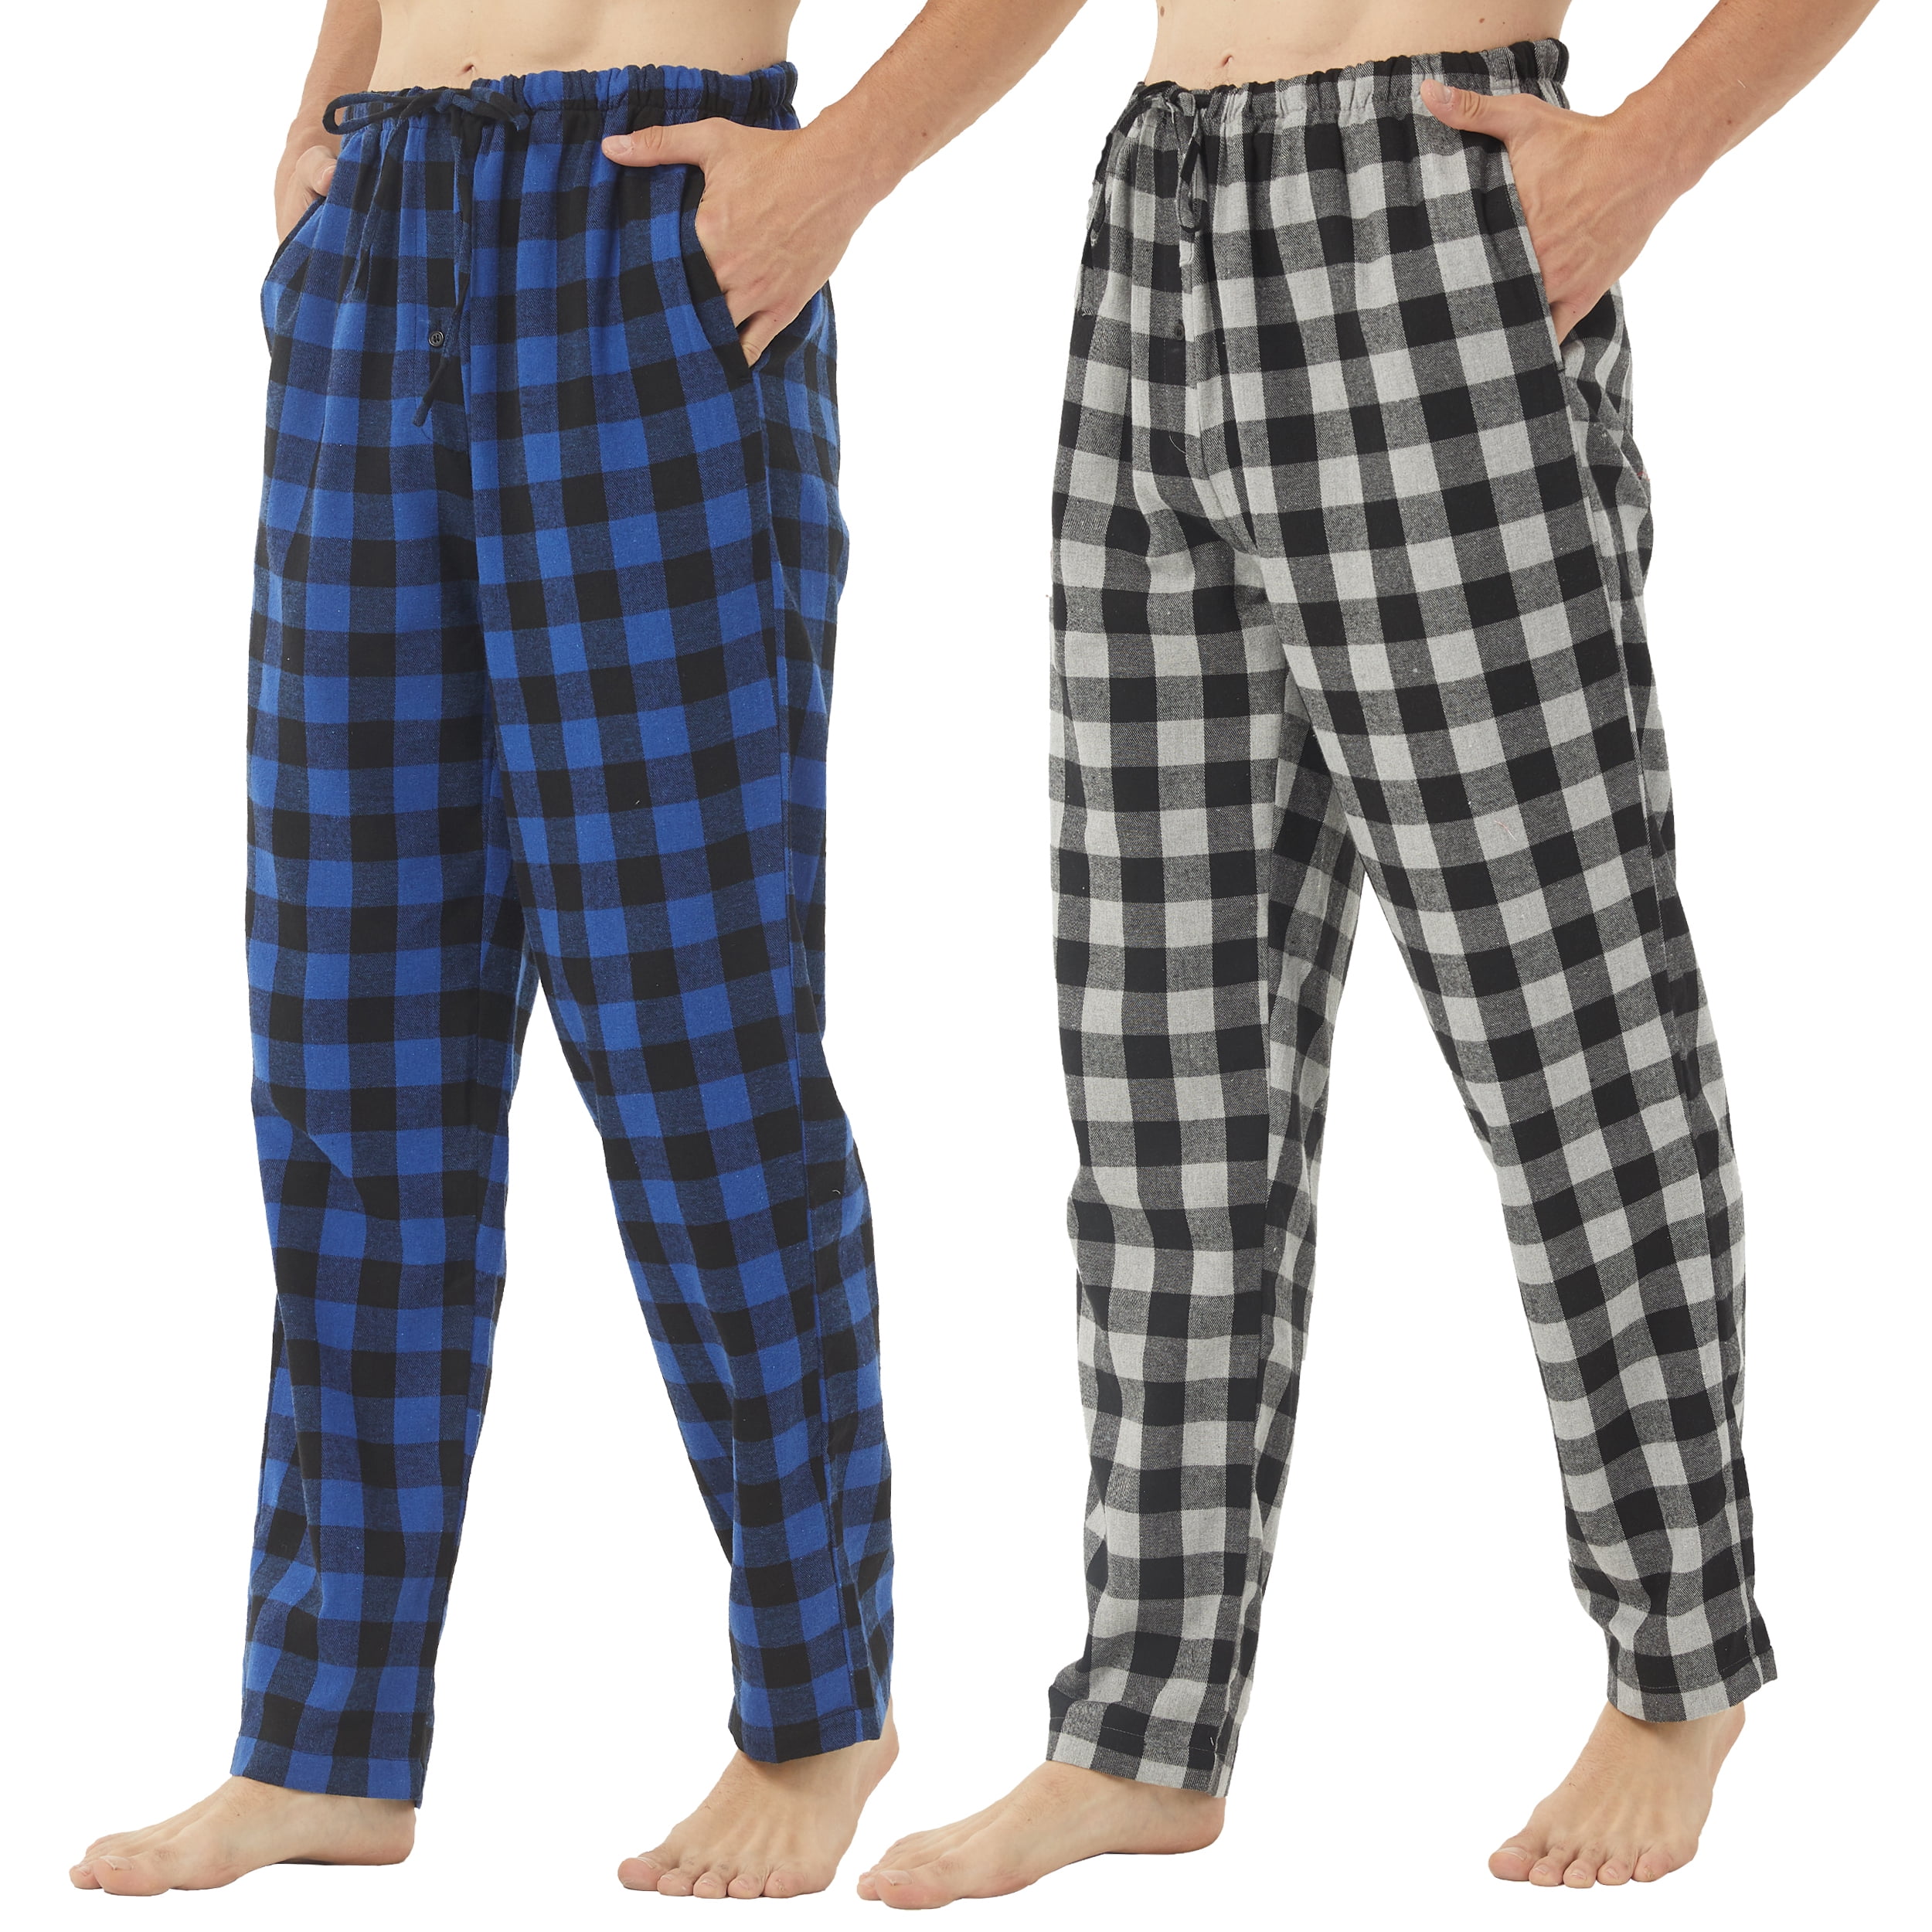 2 Pack Mens Checkered Lounge Pants Trousers Pyjamas Bottoms Pure Cotton